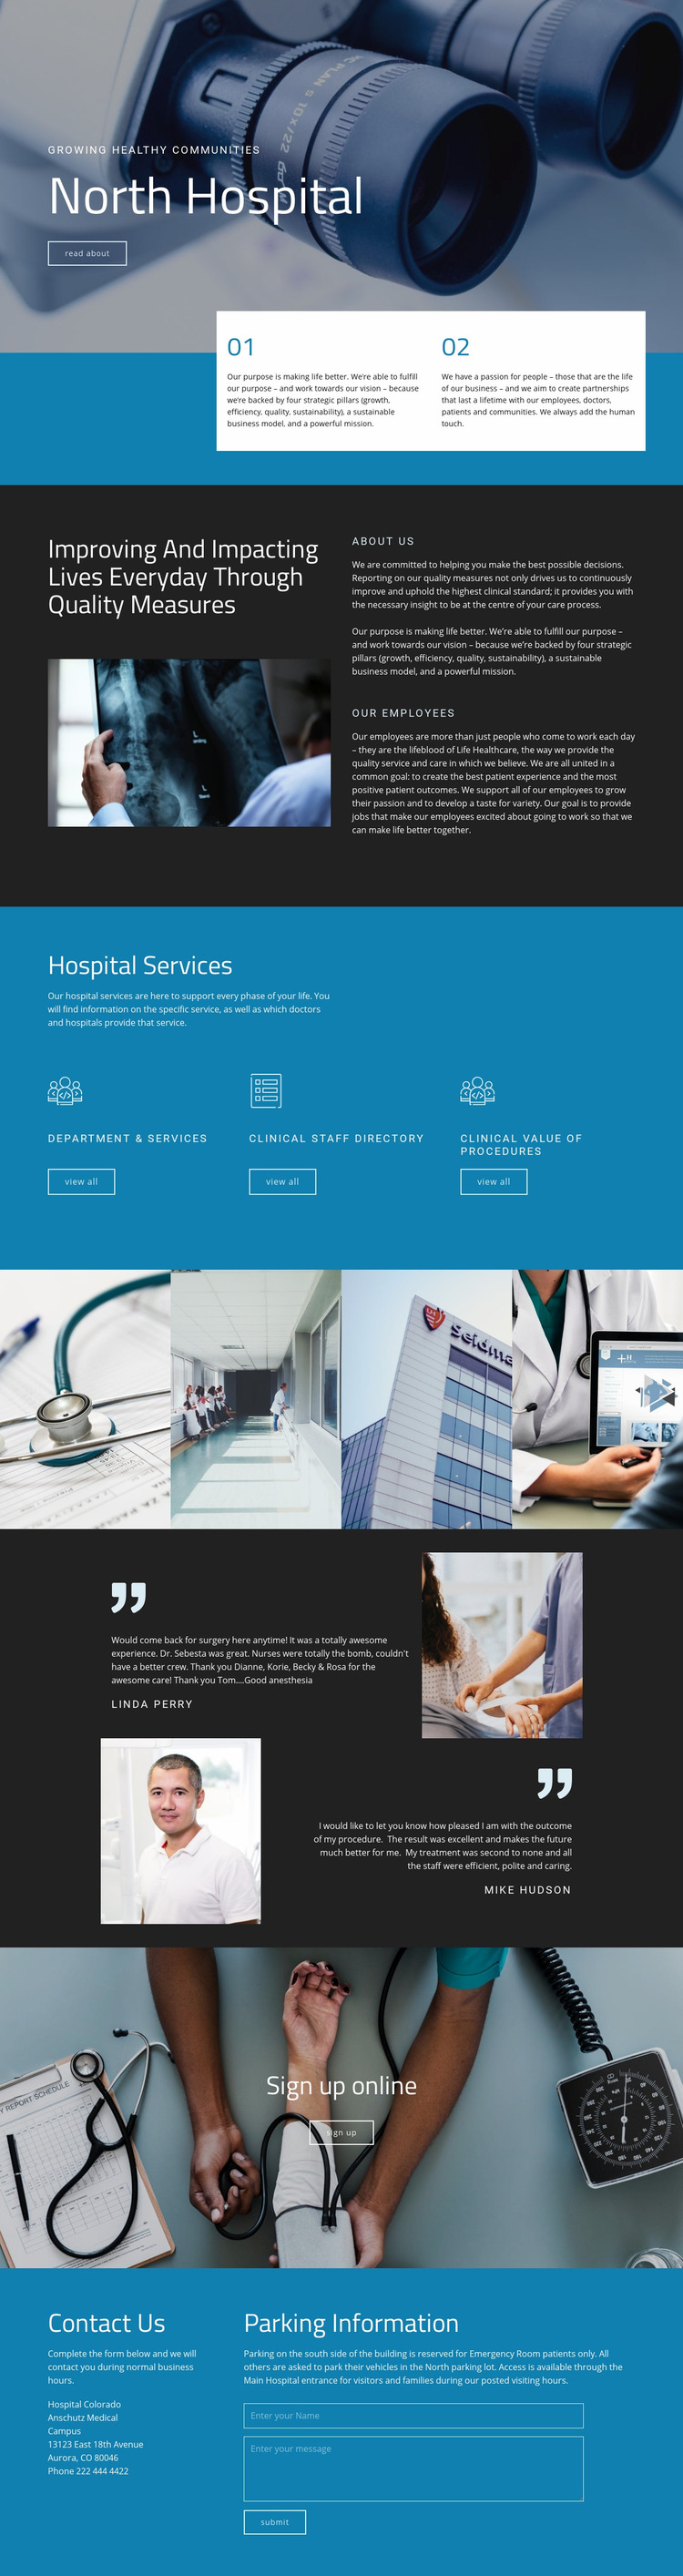 Impacting lives with medicine Web Page Design